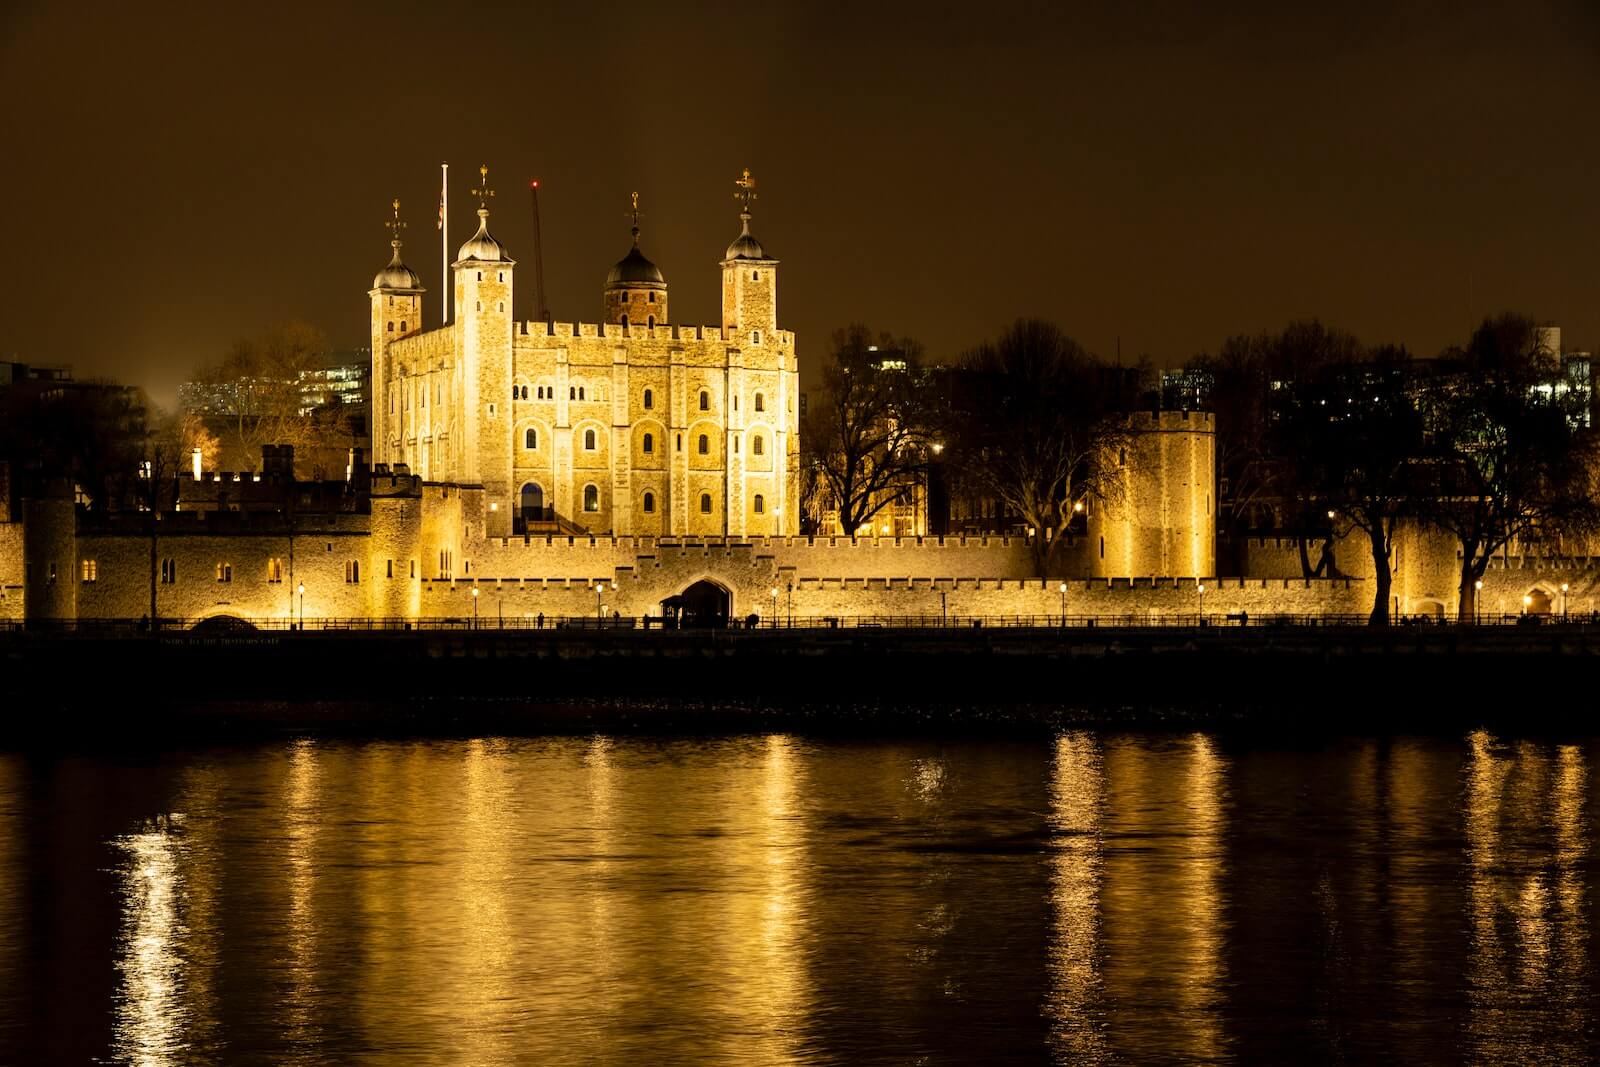 The Tower of London overlooking the River Thames